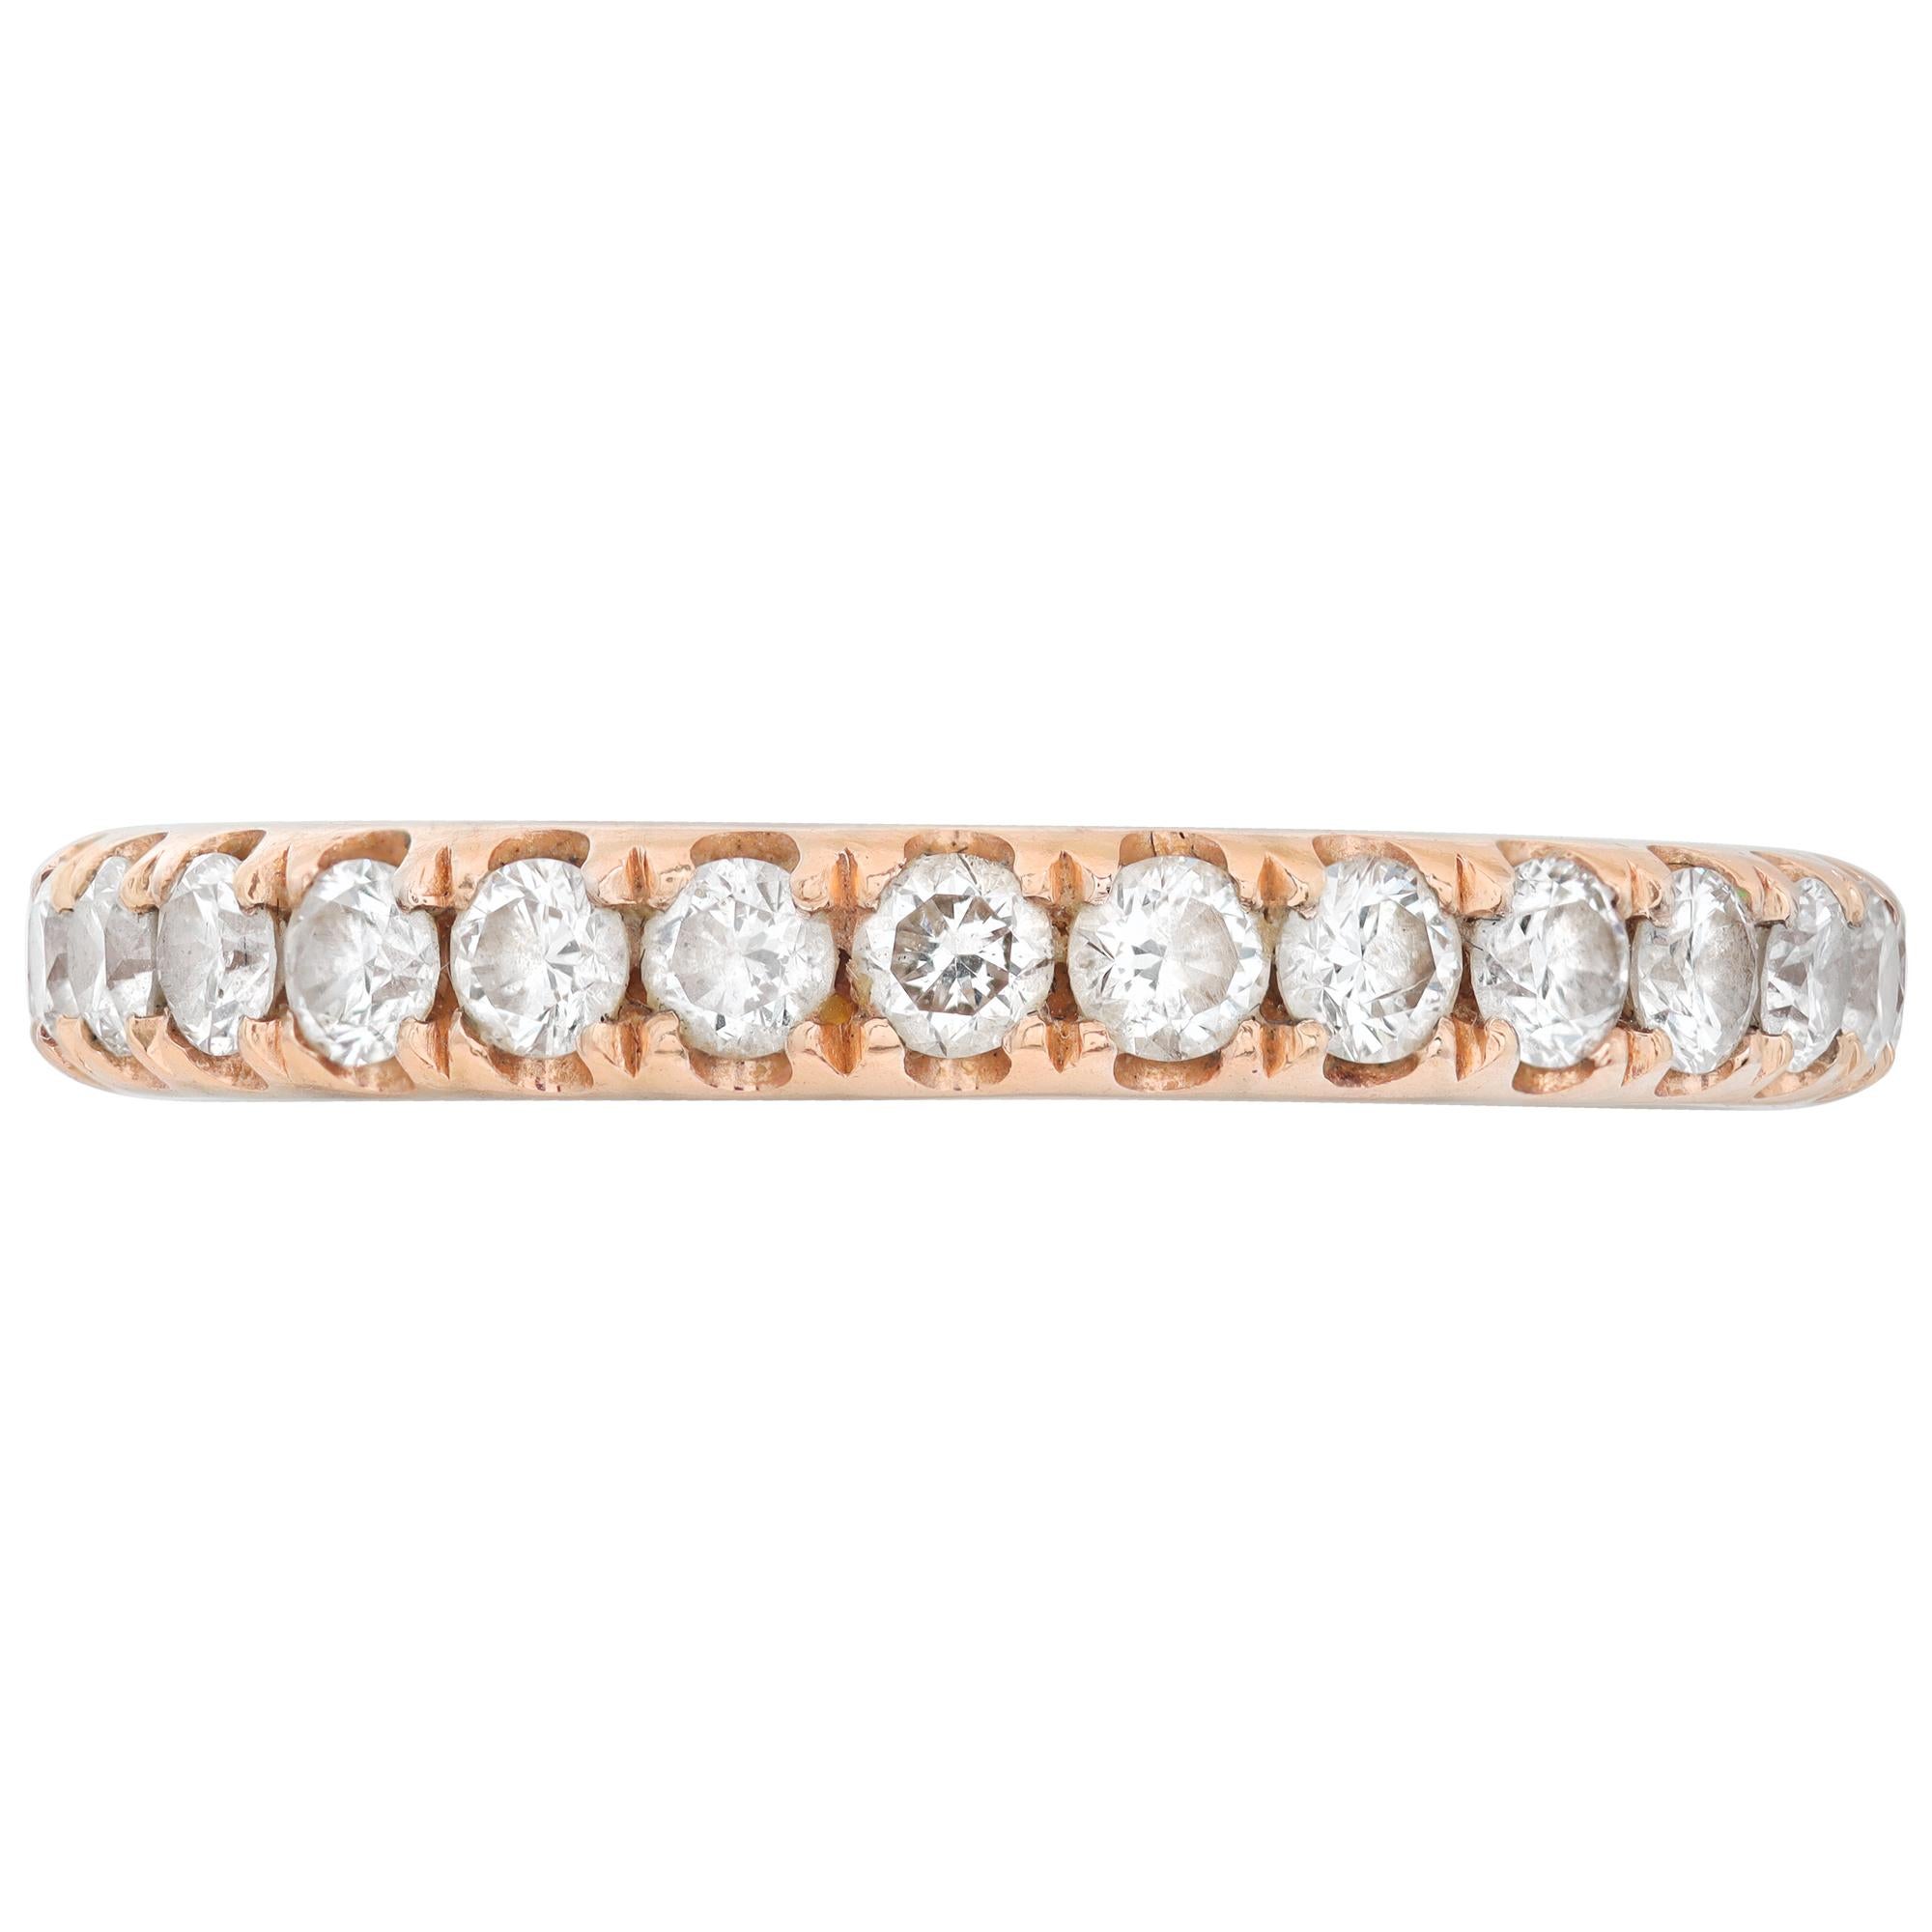 Diamond eternity band in 14k rose gold with 27 round brilliant cut diamonds, approximately 1.08 carats in G-H color, VS clarity diamonds. Size 5.

This Diamond ring is currently size 5 and some items can be sized up or down, please ask! It weighs